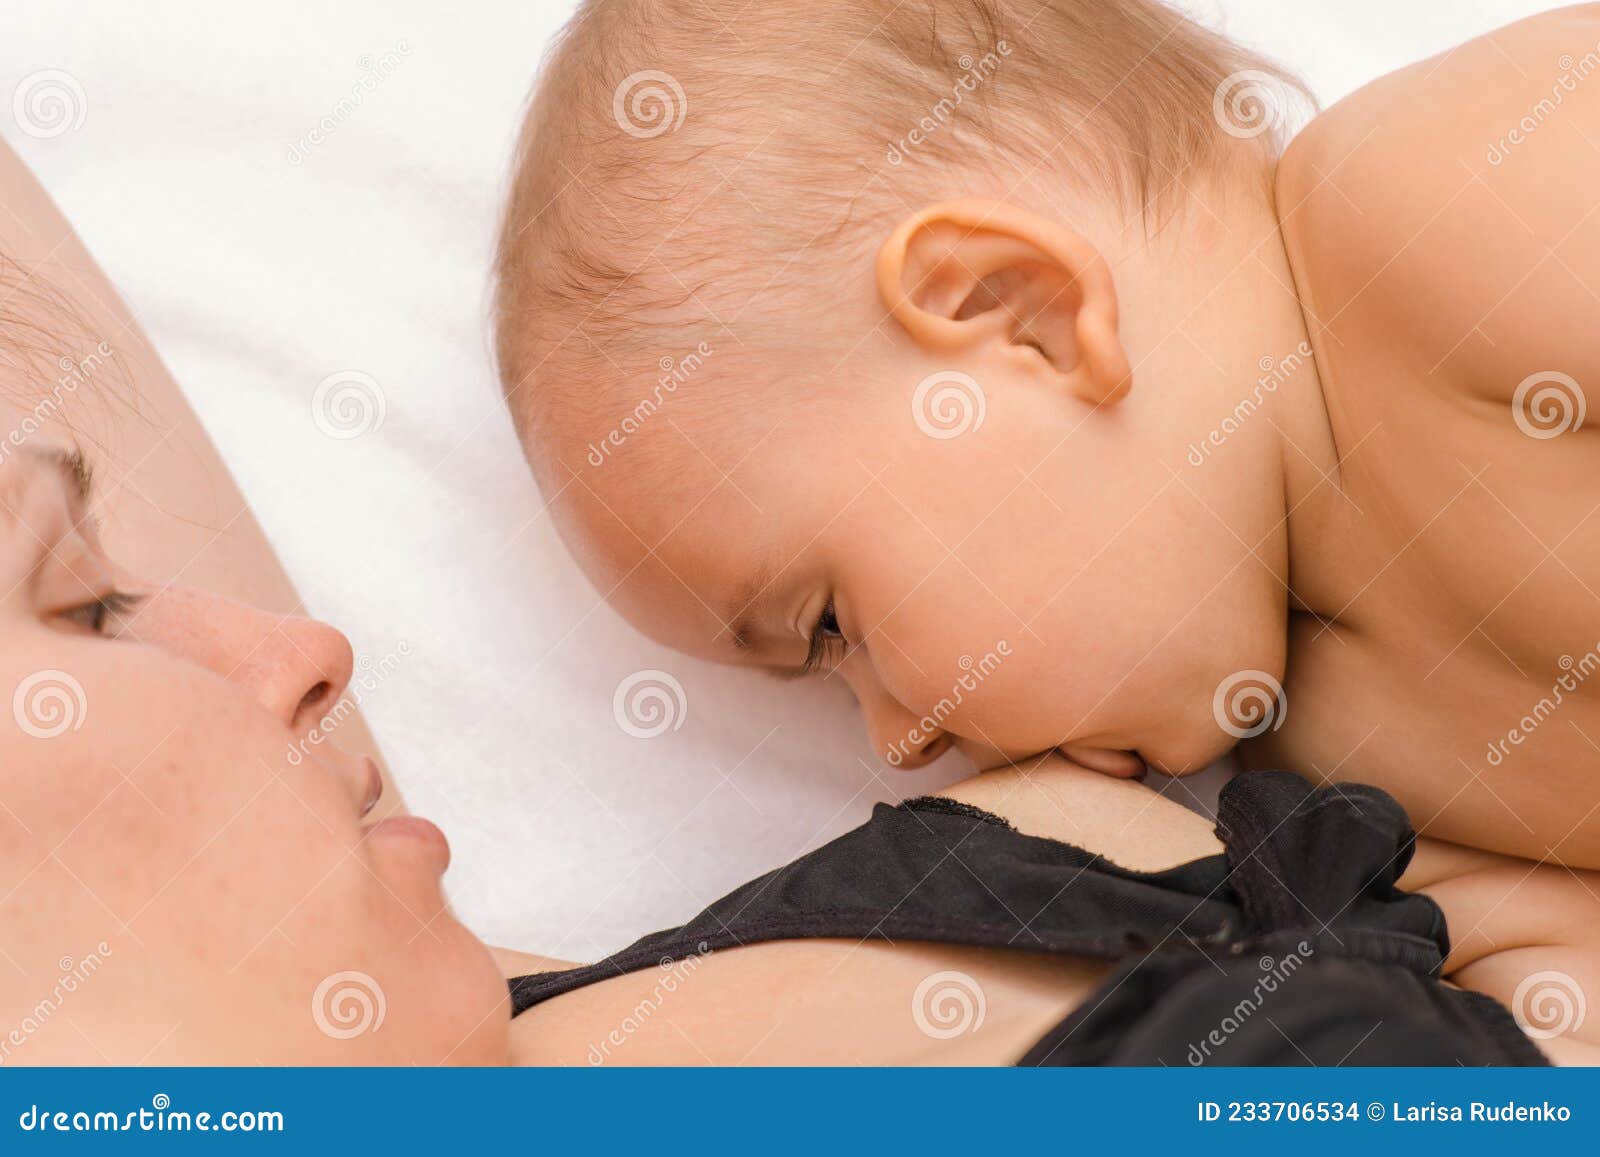 Breastfeeding. Mom Breast-feeds Baby through a Special Bra for Feeding  Babies Stock Photo - Image of infant, face: 233706534